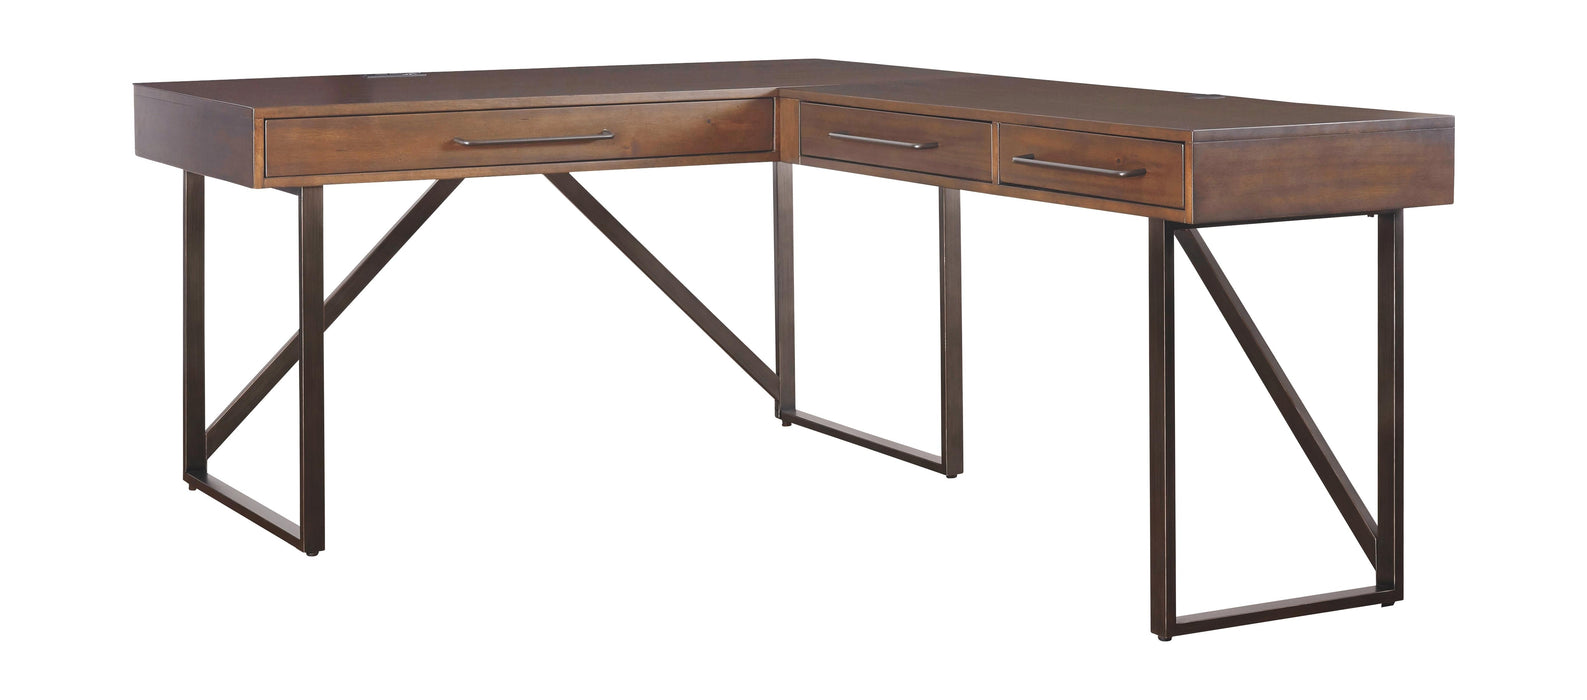 Starmore - Brown - Home Office L Shaped Desk Cleveland Home Outlet (OH) - Furniture Store in Middleburg Heights Serving Cleveland, Strongsville, and Online